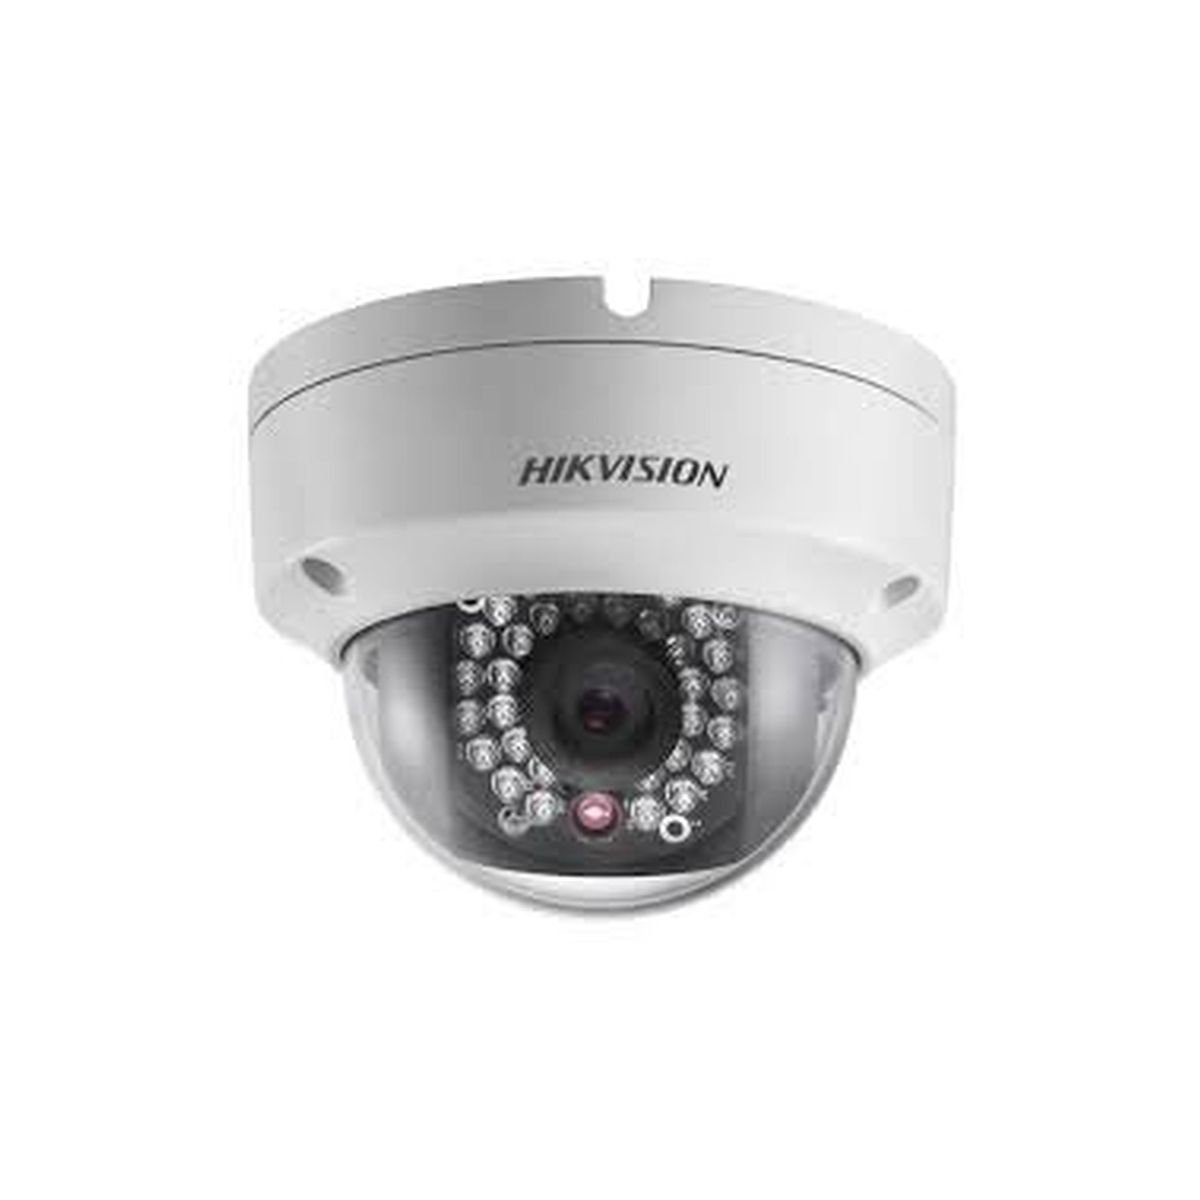 Cámaras IP WiFi Hikvision Tipo Domo DS-2CD2110F-IW DS-2CD2110F-IW